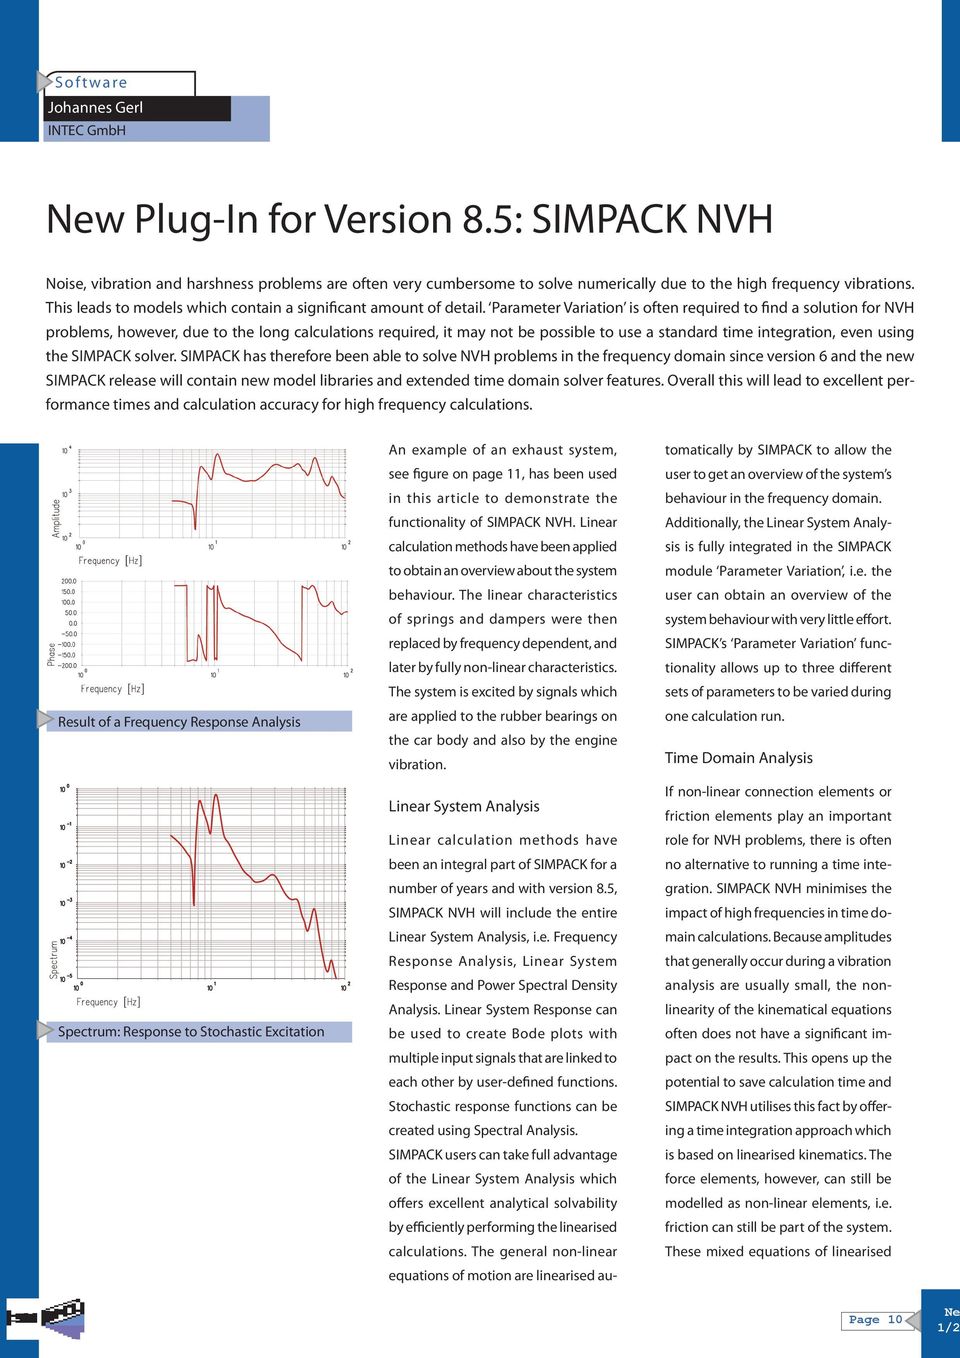 Para meter Variation is often required to find a solution for NVH problems, however, due to the long calculations required, it may not be possible to use a standard time integration, even using the